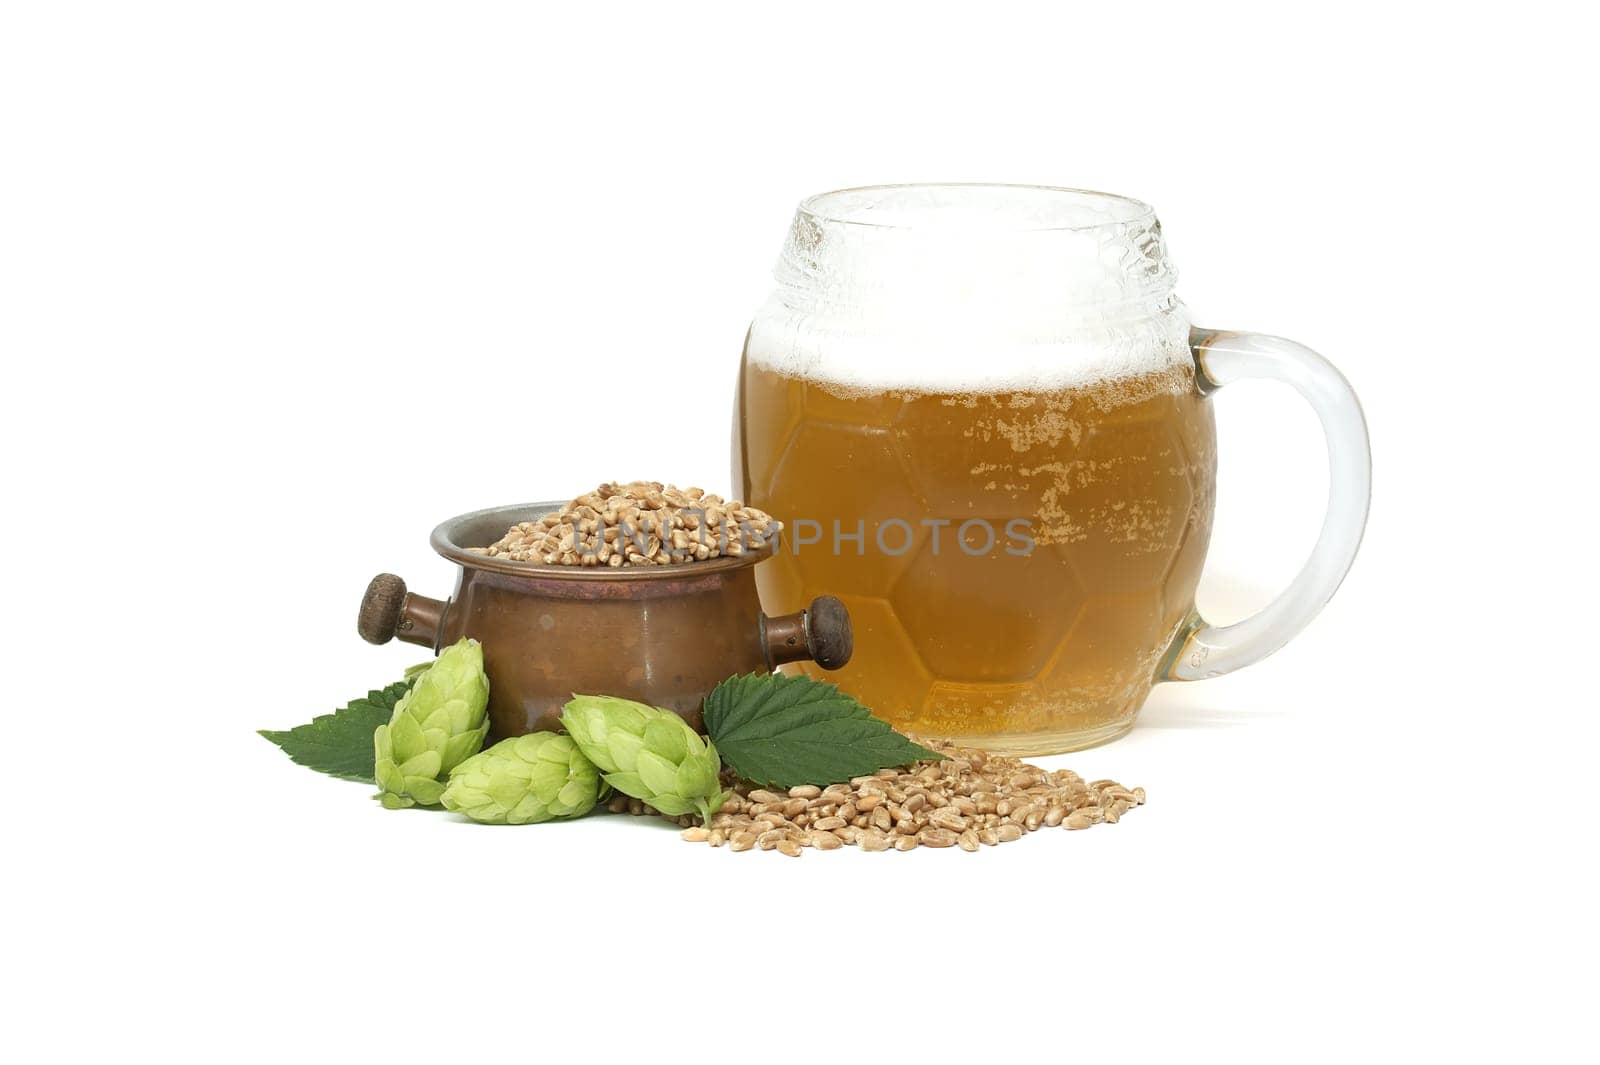 Beer brewing ingredients isolated on white background by NetPix